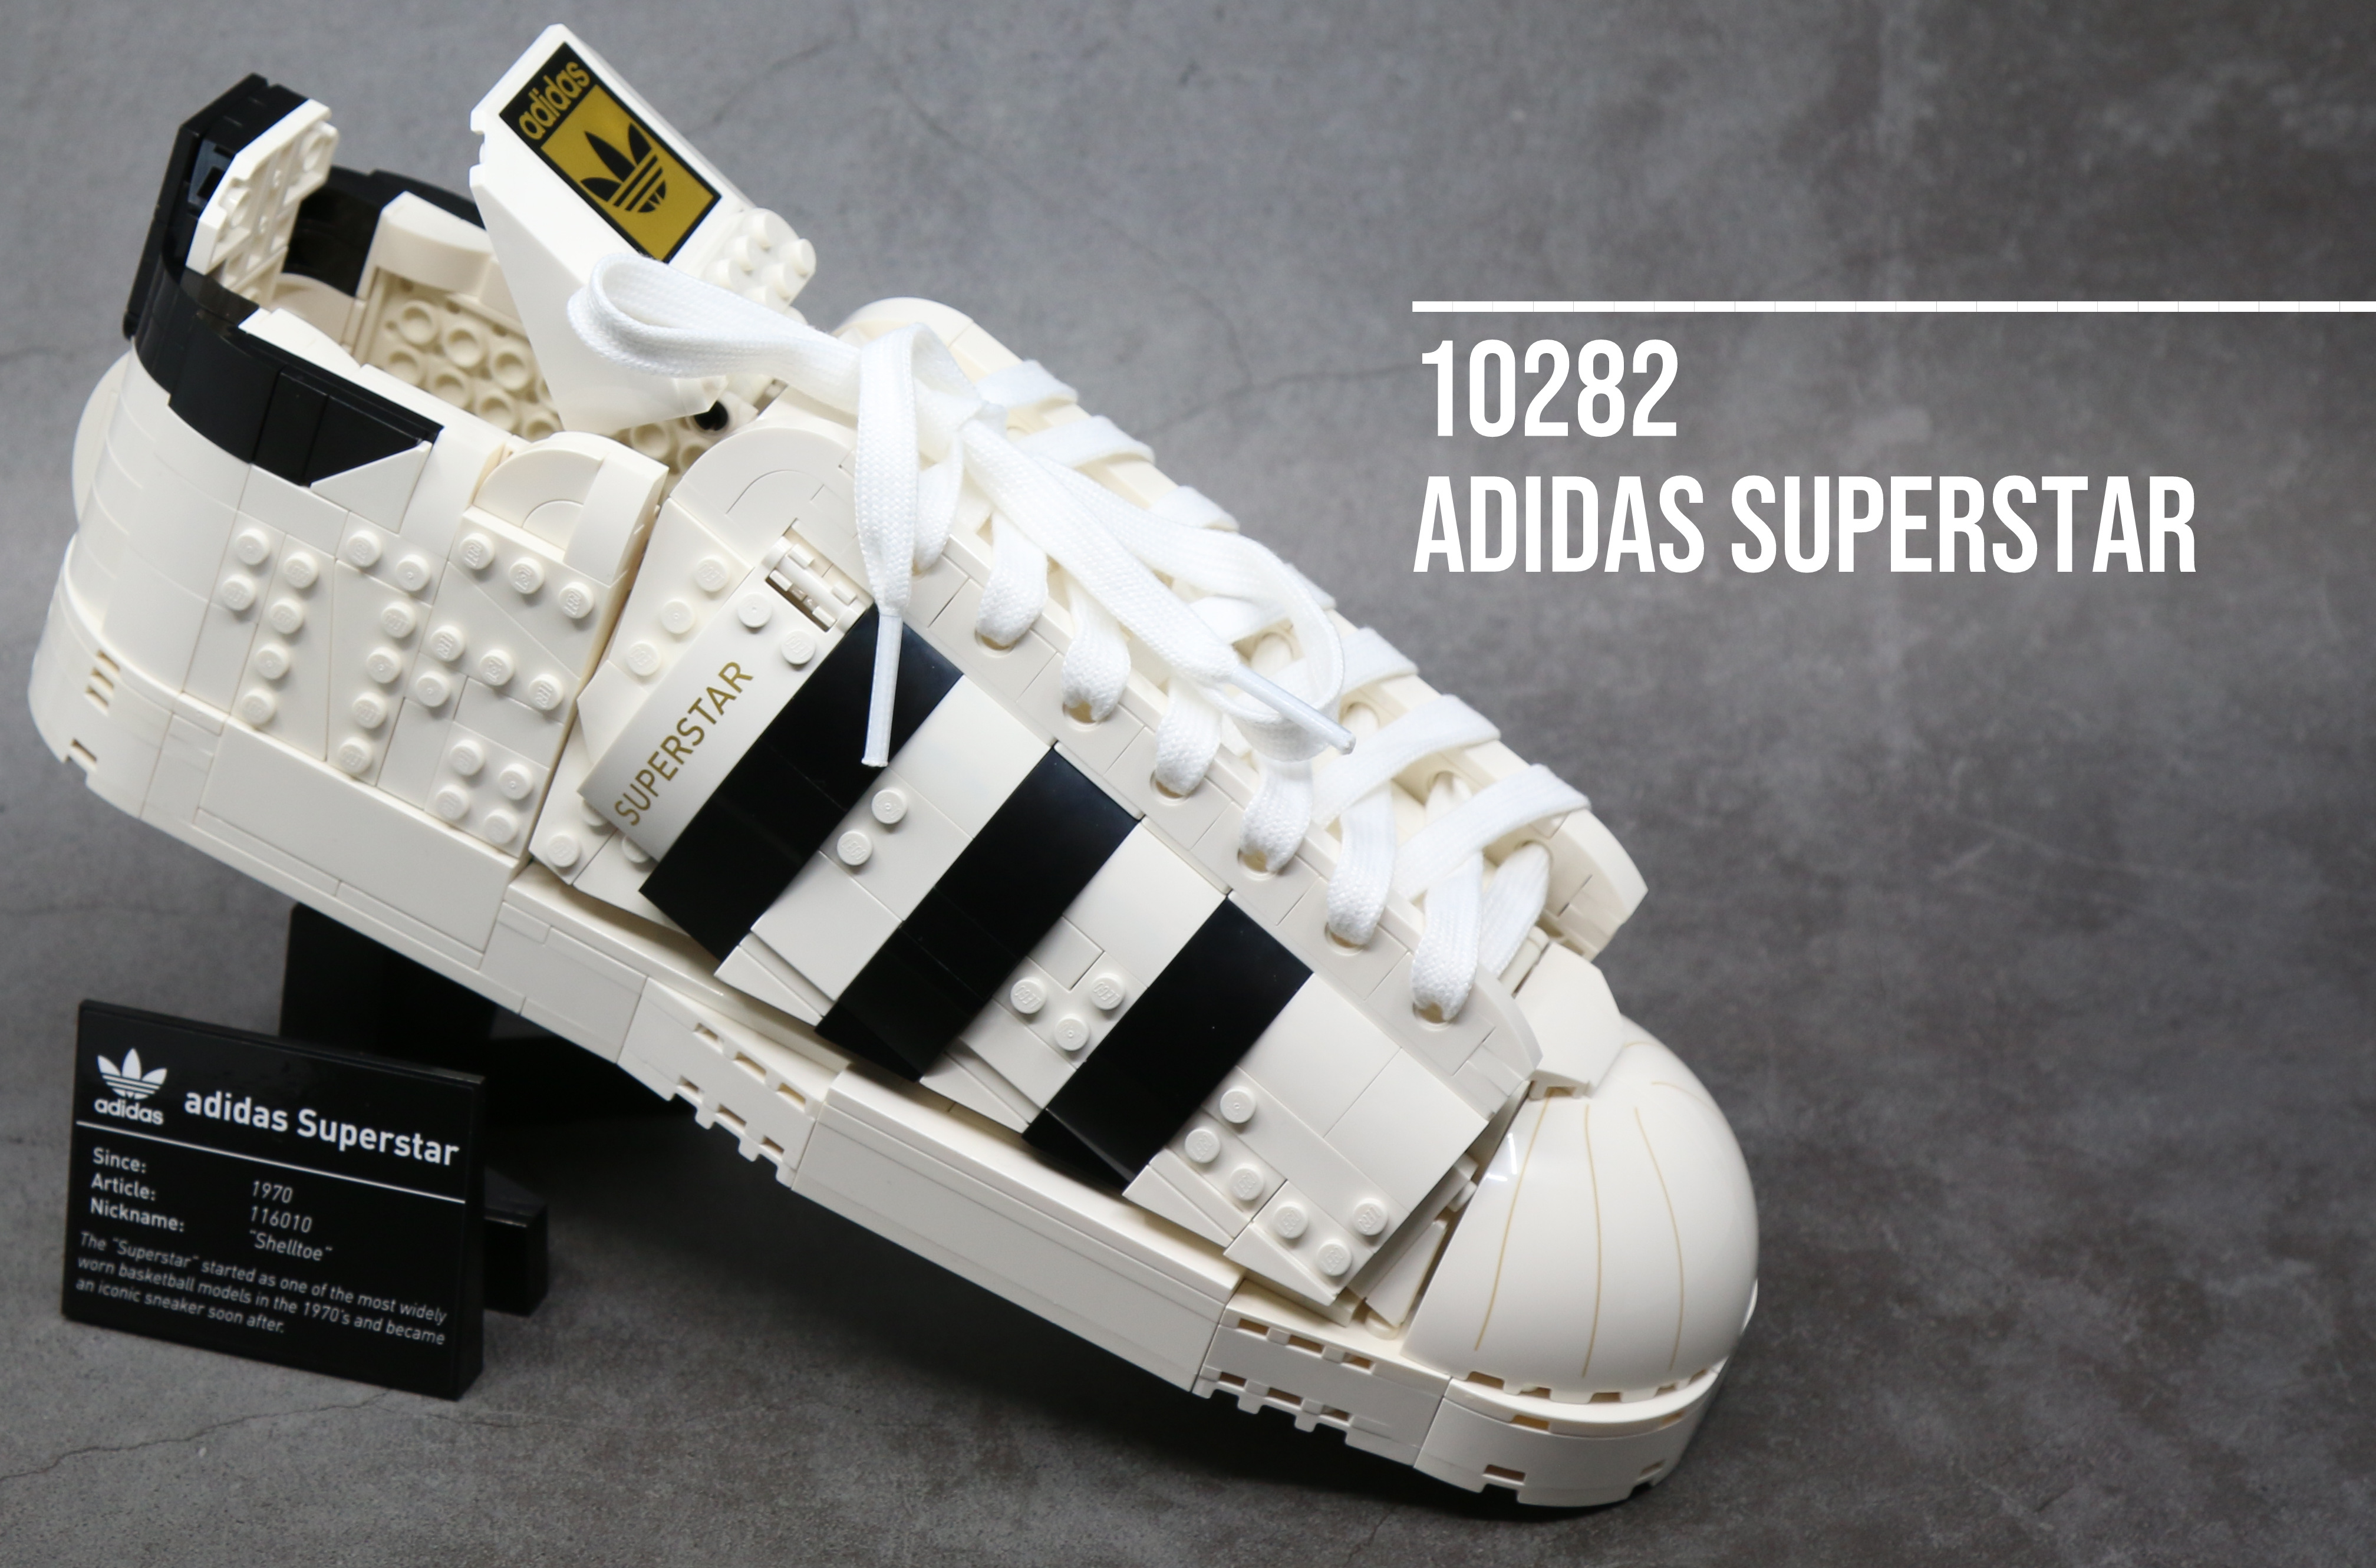 voice embarrassed Remission Review: LEGO 10282 Adidas Superstar - Jay's Brick Blog